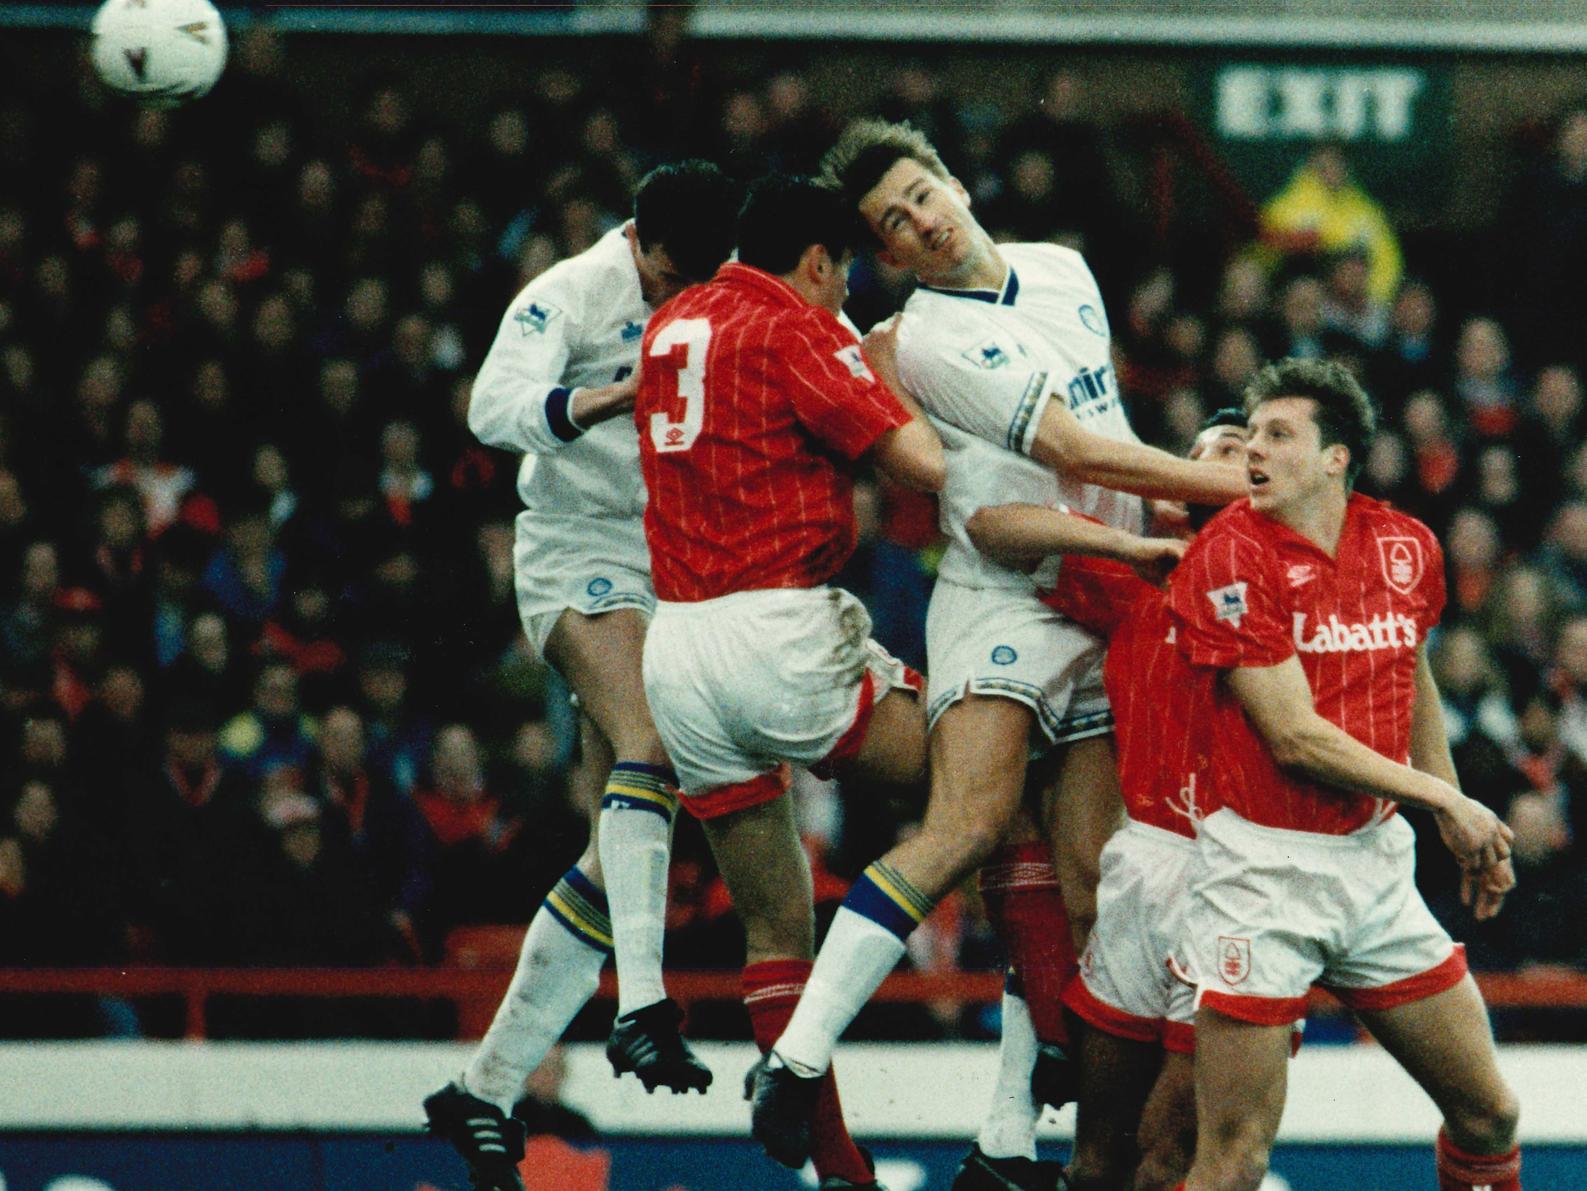 From left to right, Gary Speed, Steve Chettle, Lee Chapman, Gary Charles and Carl Tyler are jumping to it during the Premier League clash at the City Ground.